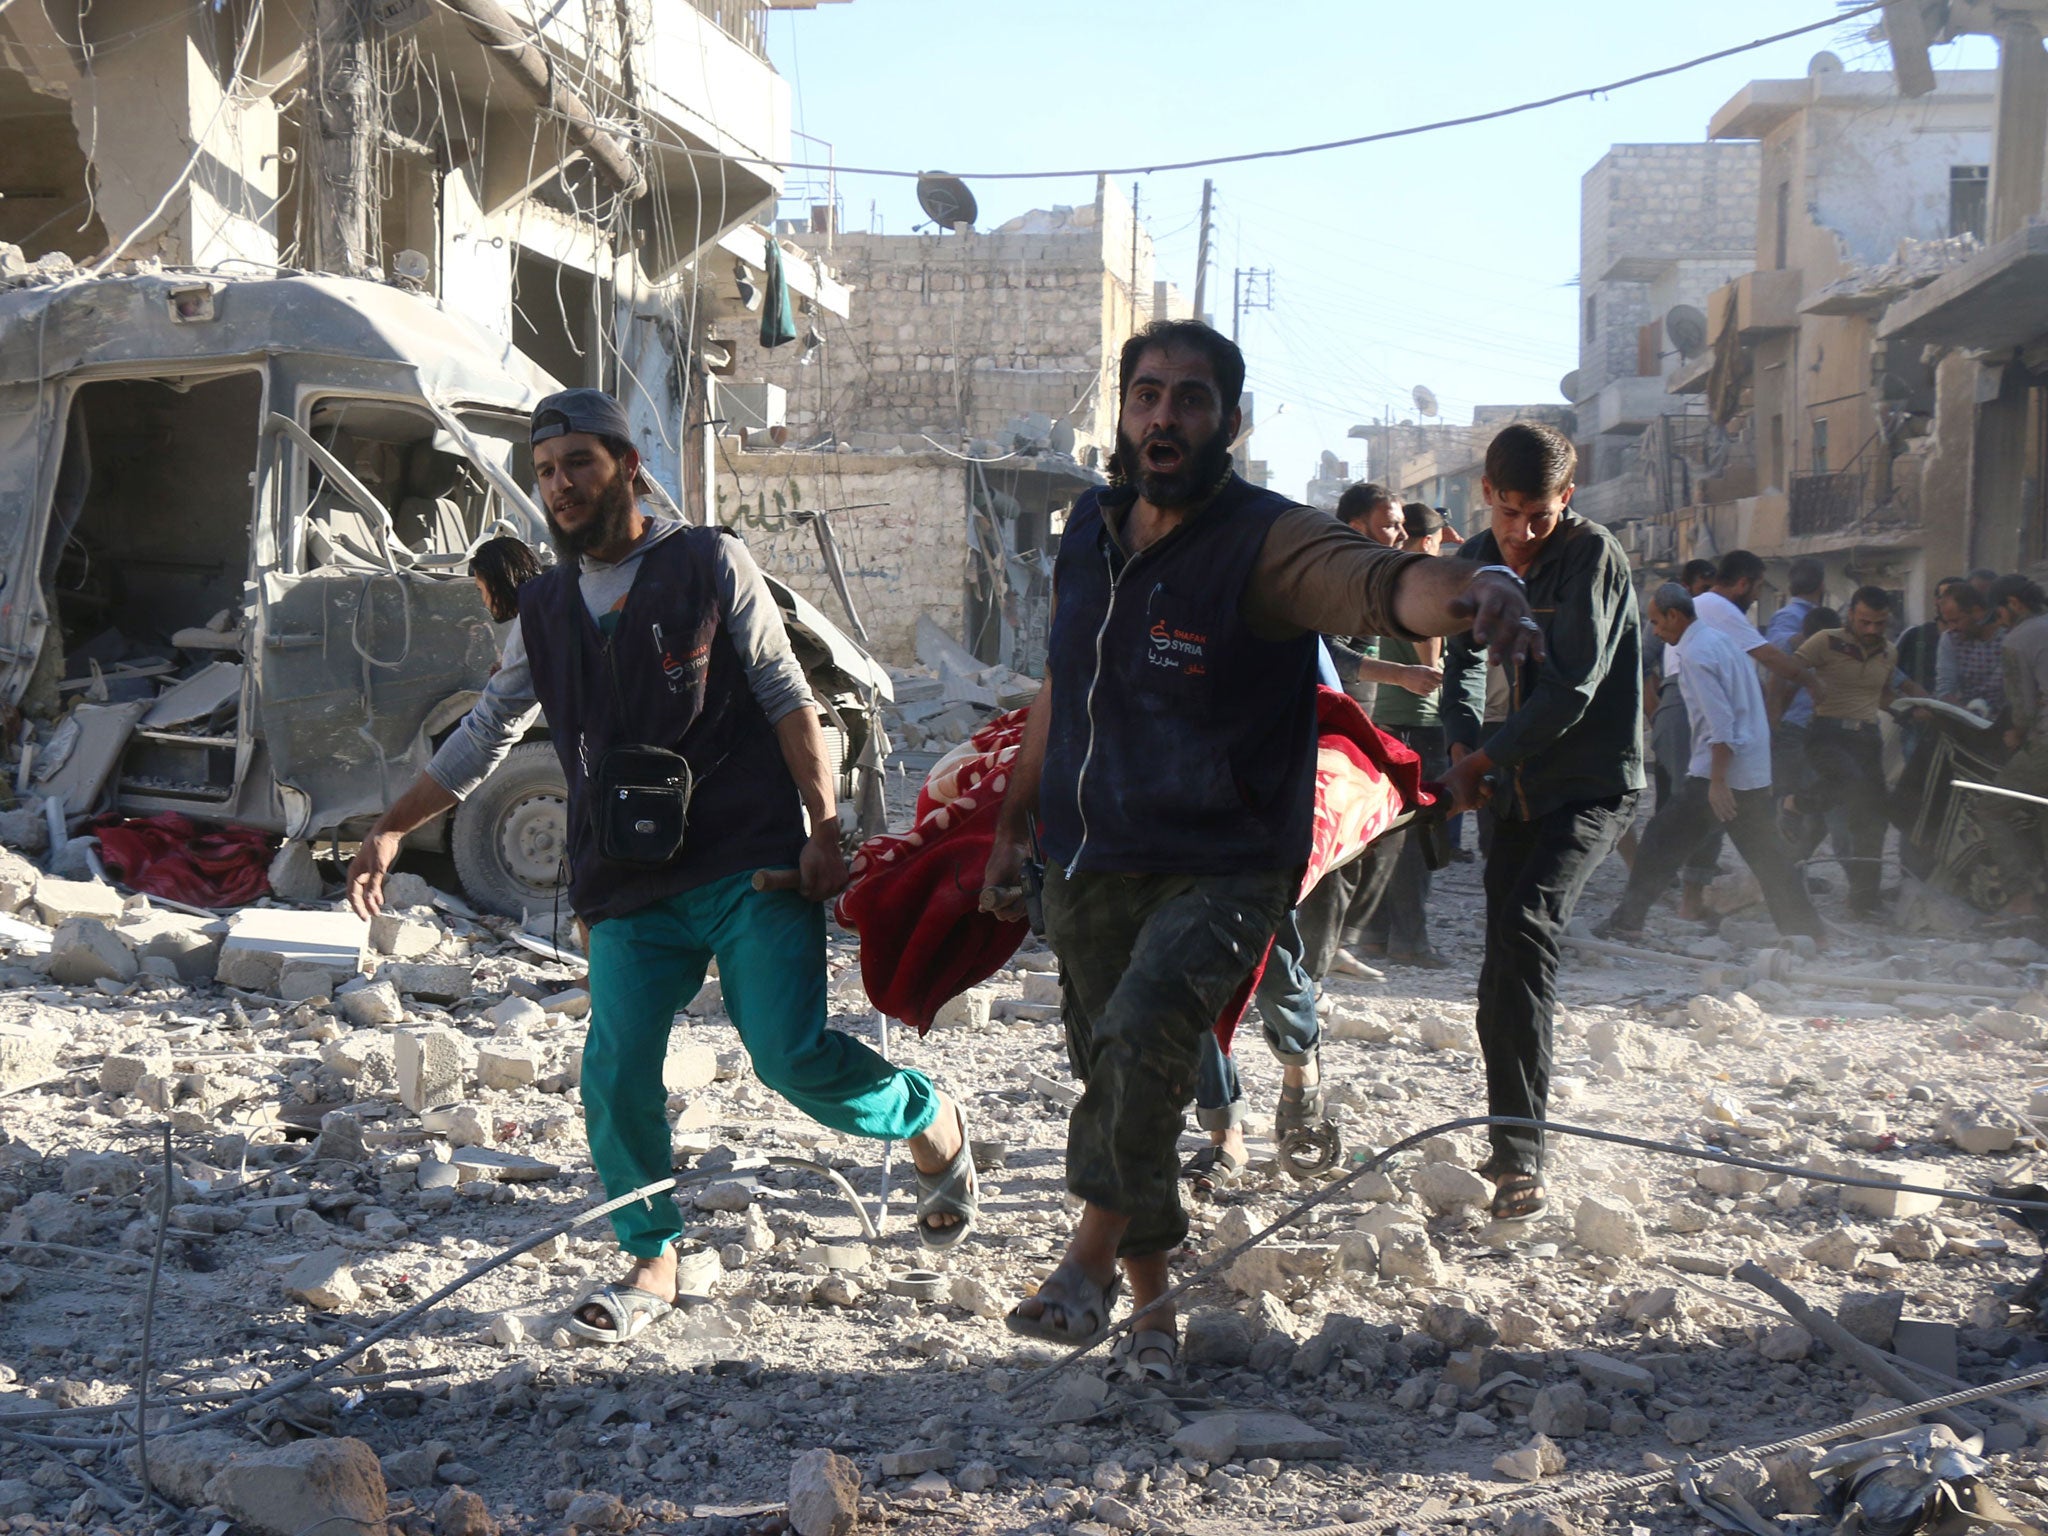 Aleppo has been hit by a number of Syrian government and Russian air strikes in recent weeks